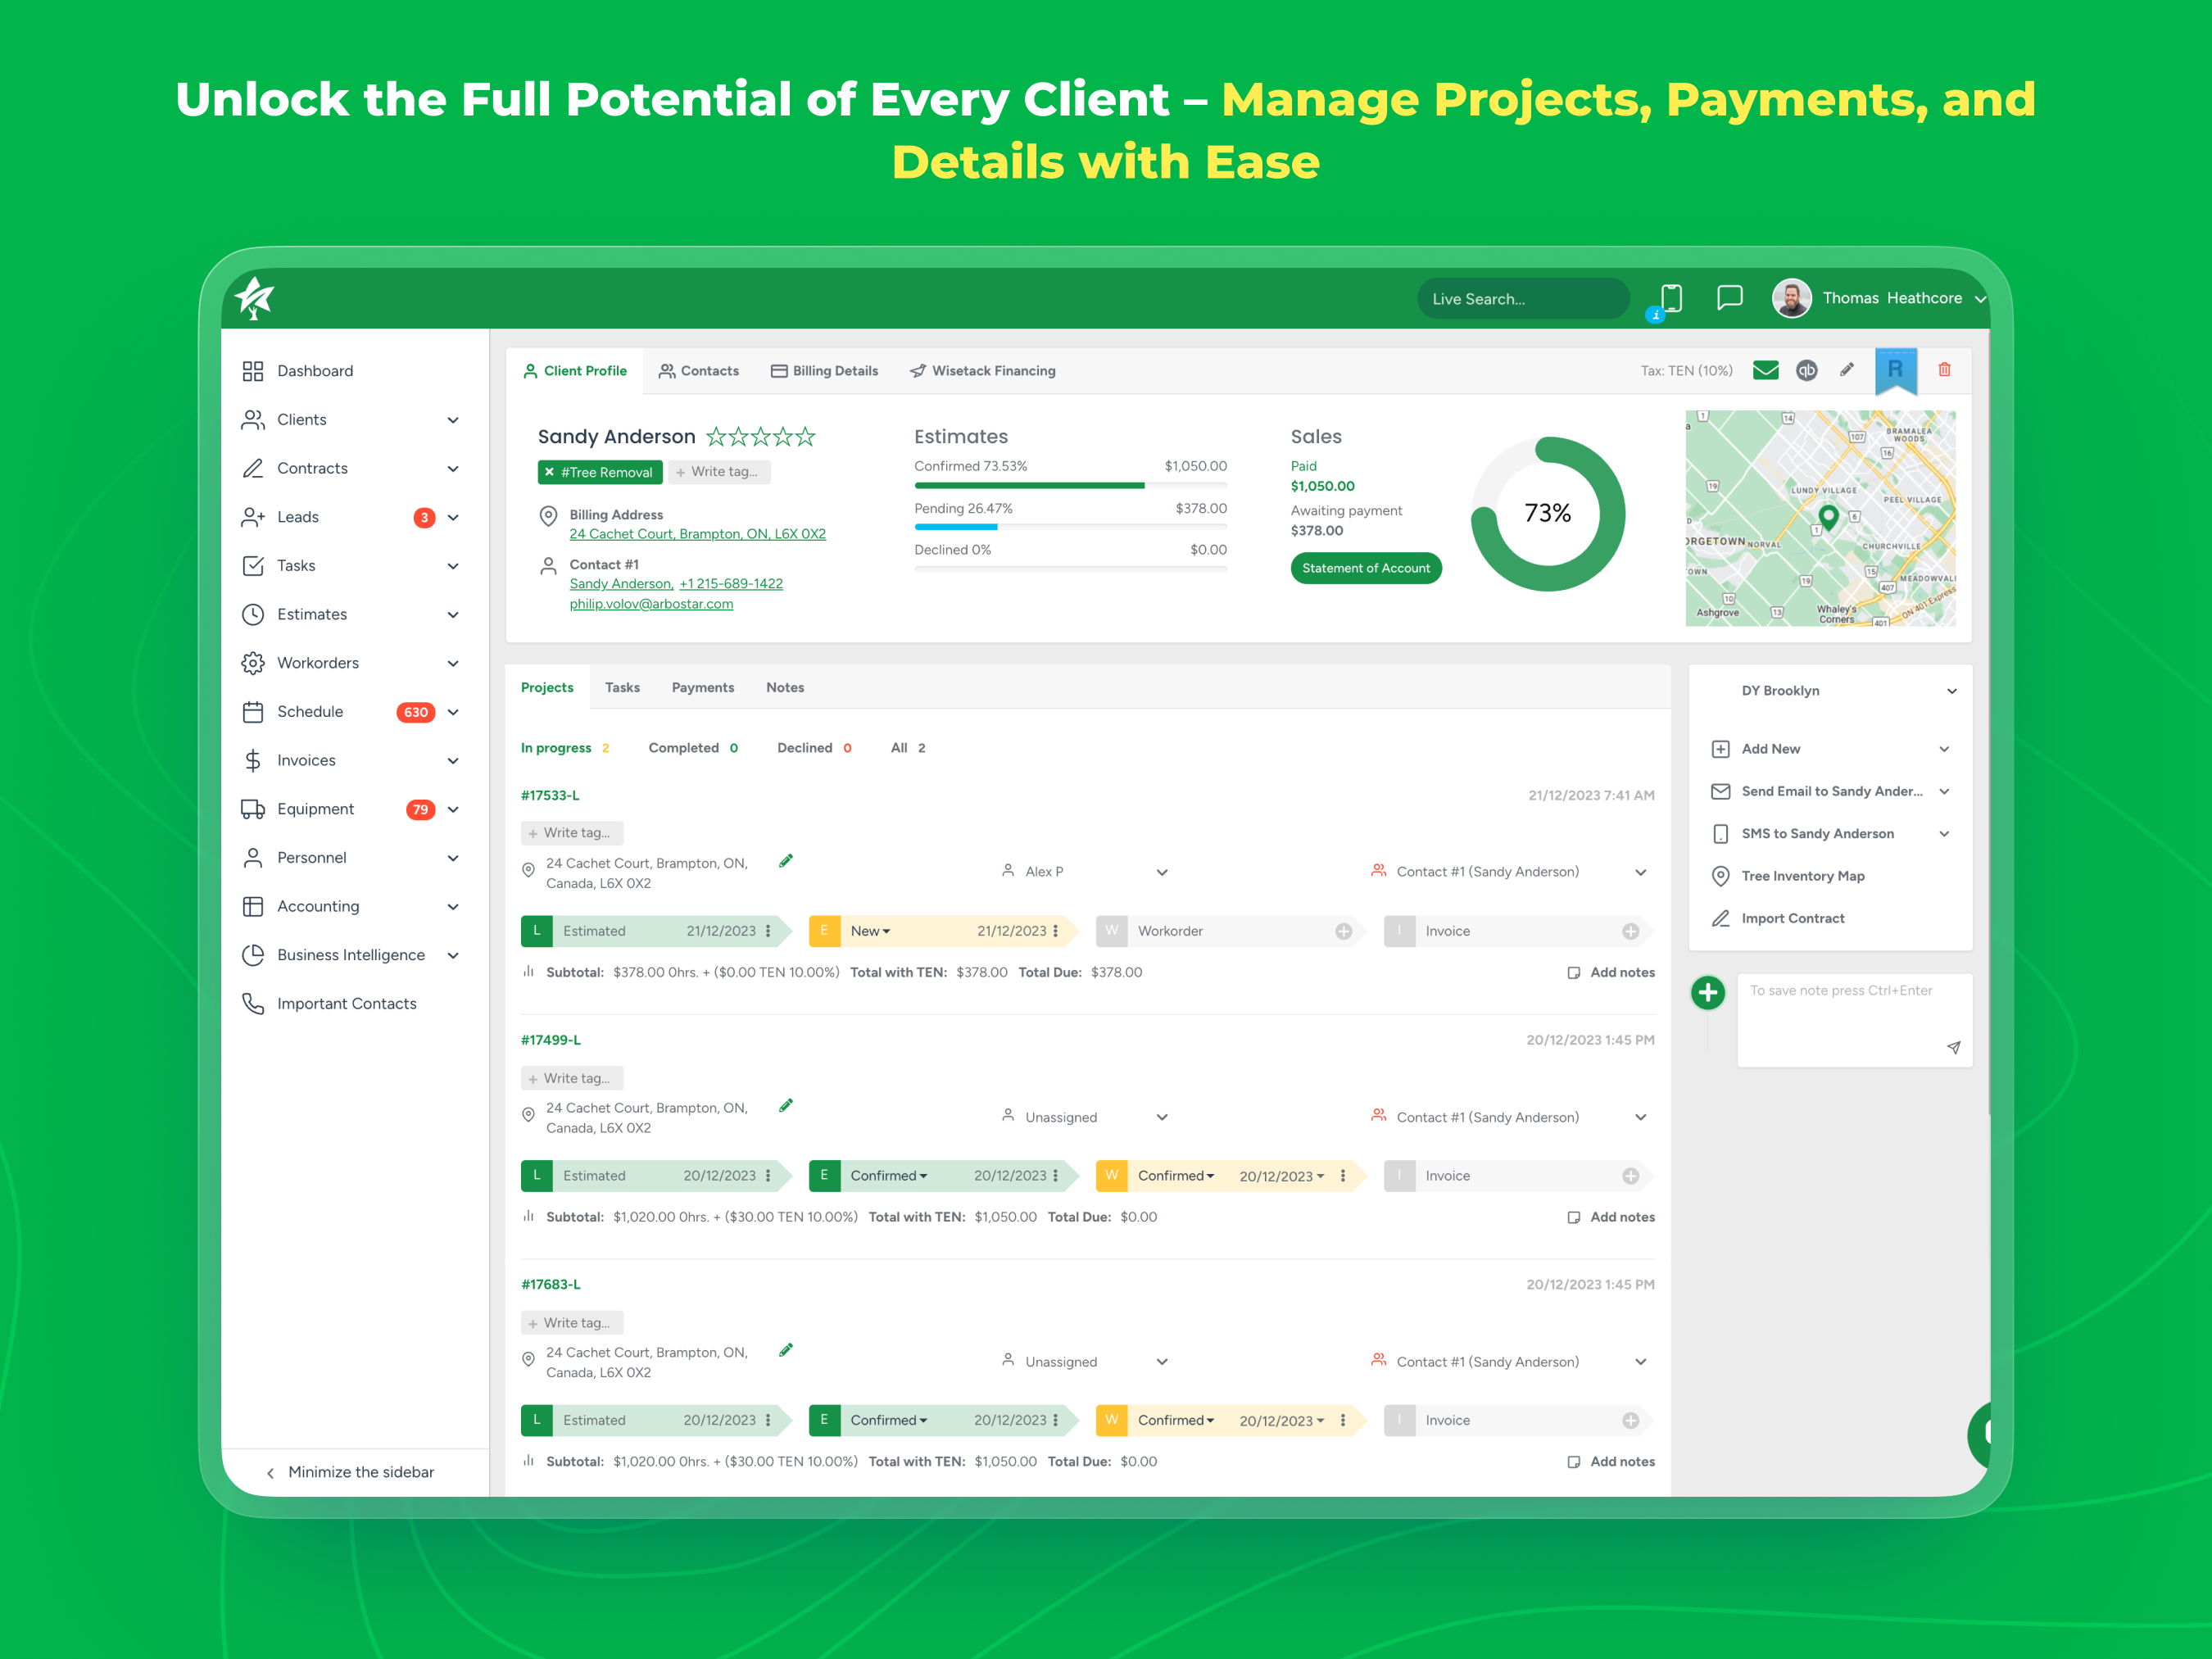 Unlock the Full Potential of Every Client – Manage Projects, Payments, and Details with Ease